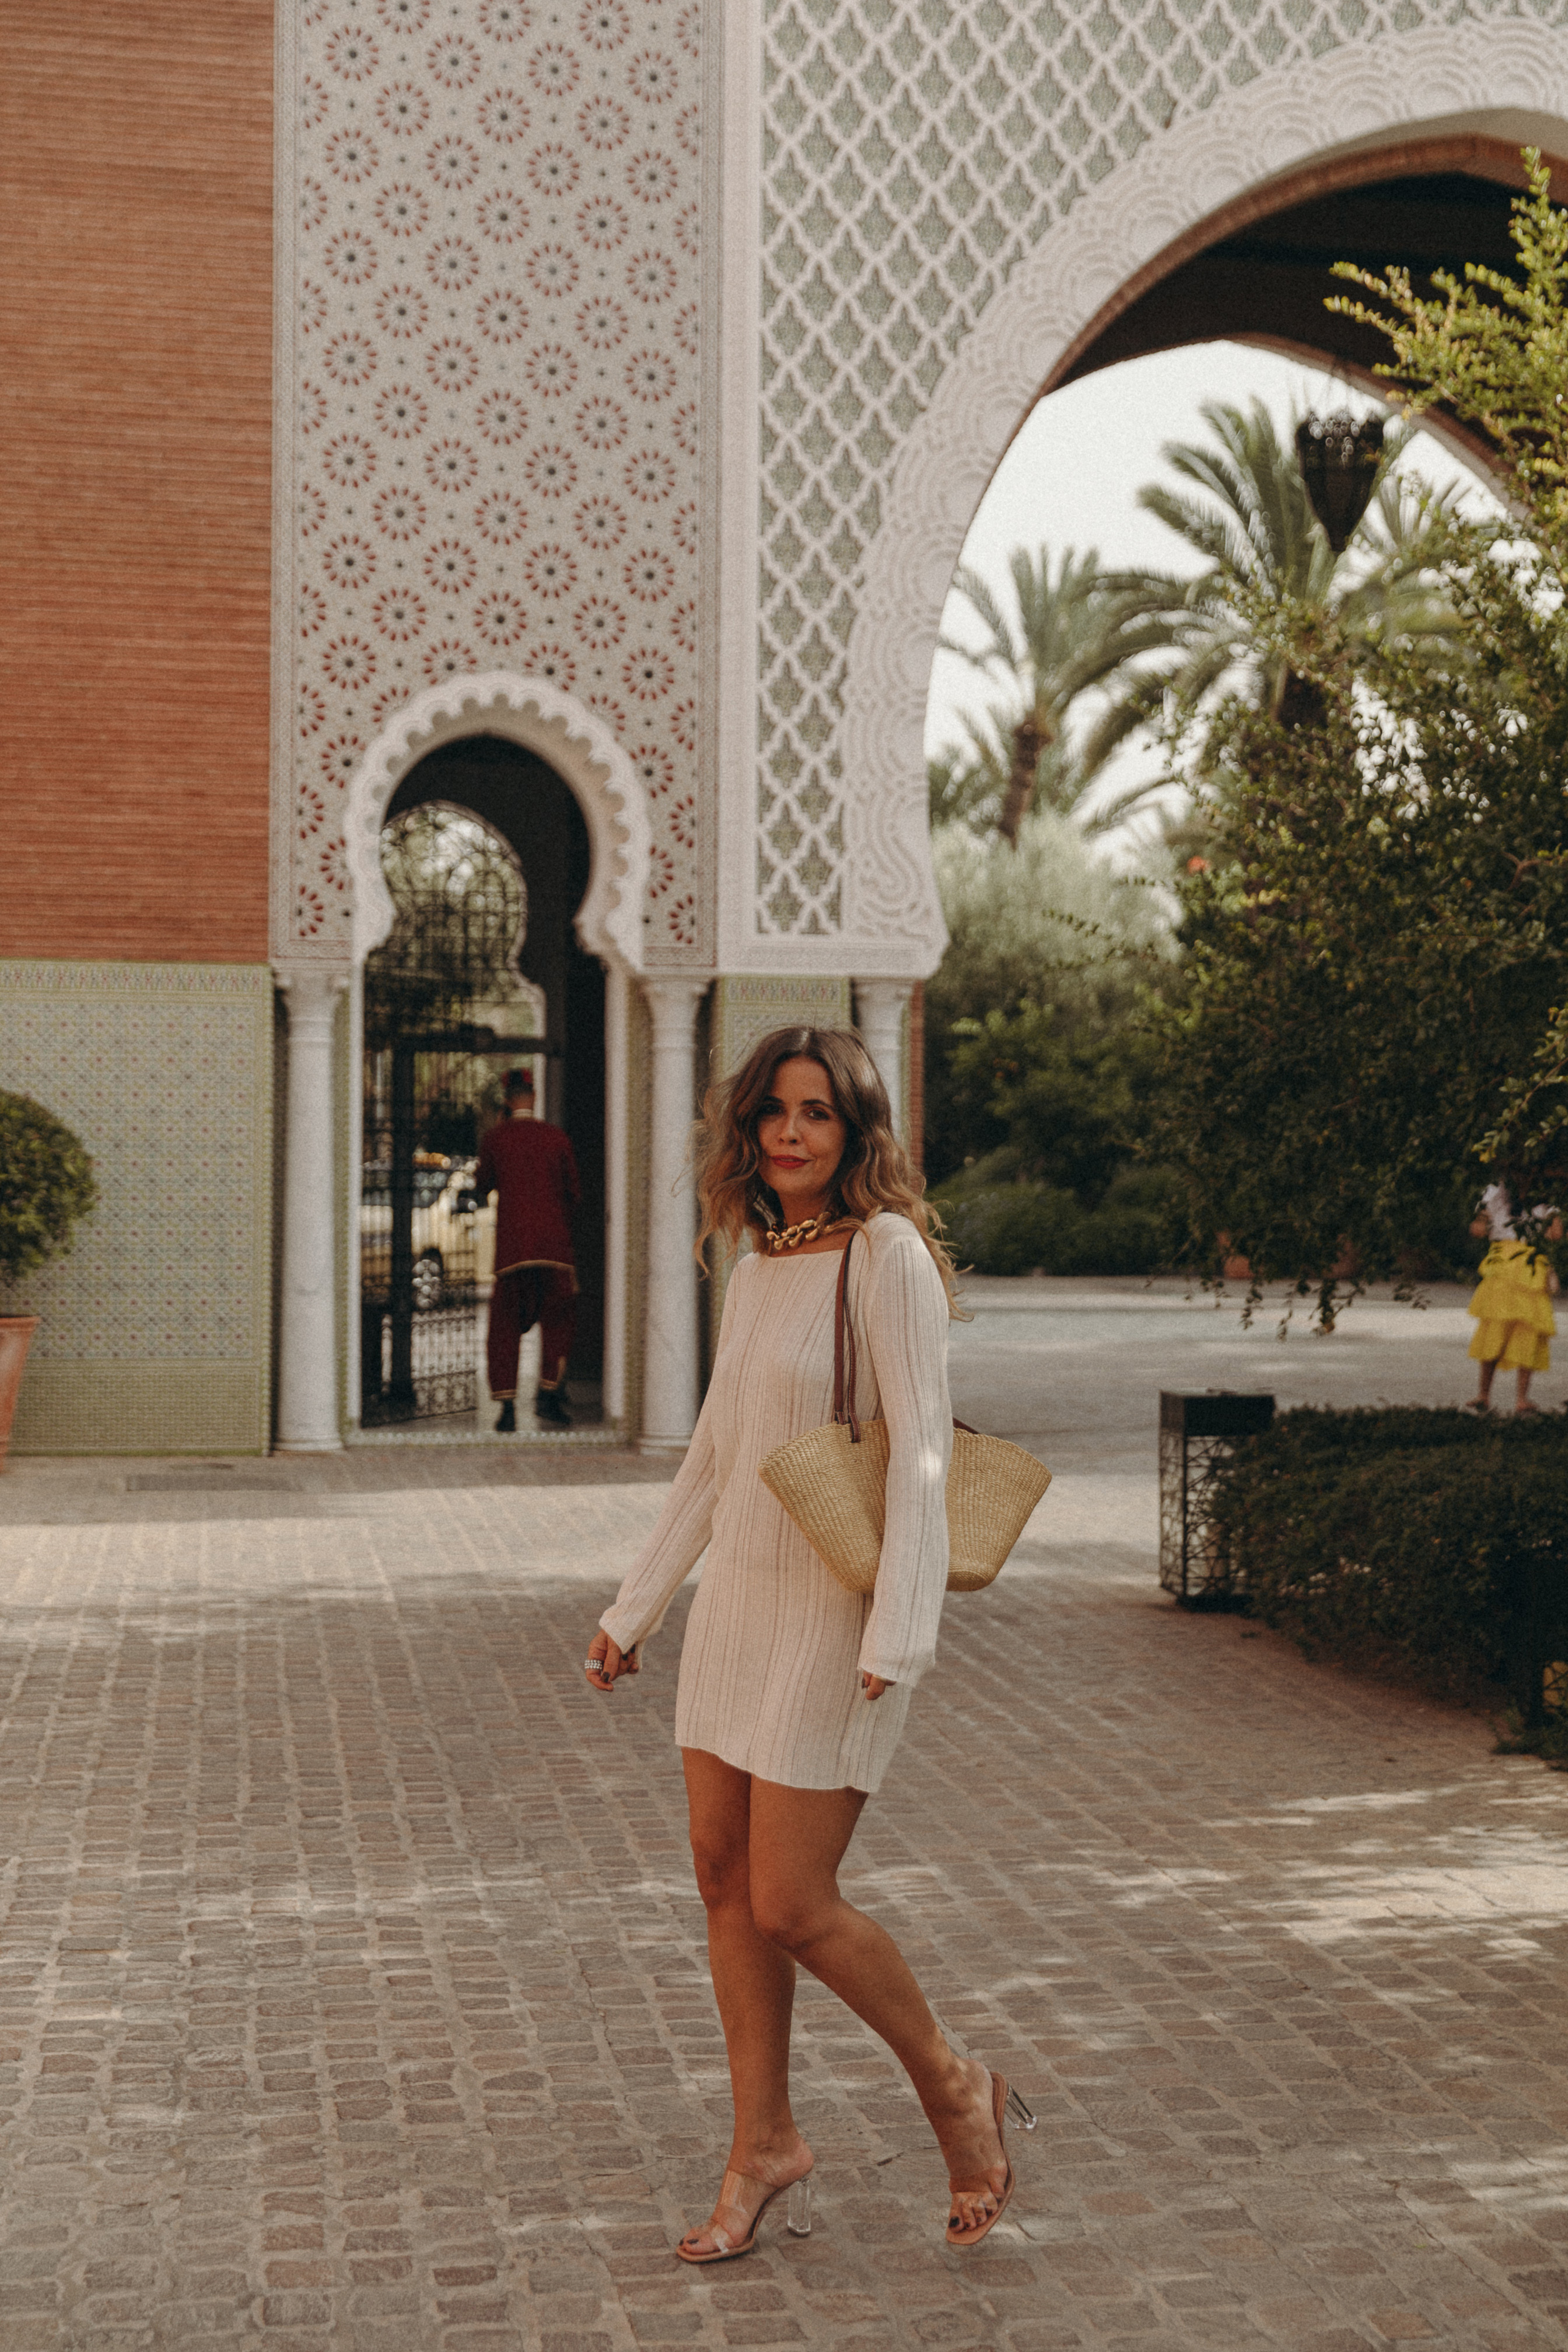 A day at the Royal Mansour Hotel Marrakech, wearing a Zara spring dress, Loewe basket bag and a chunky necklace